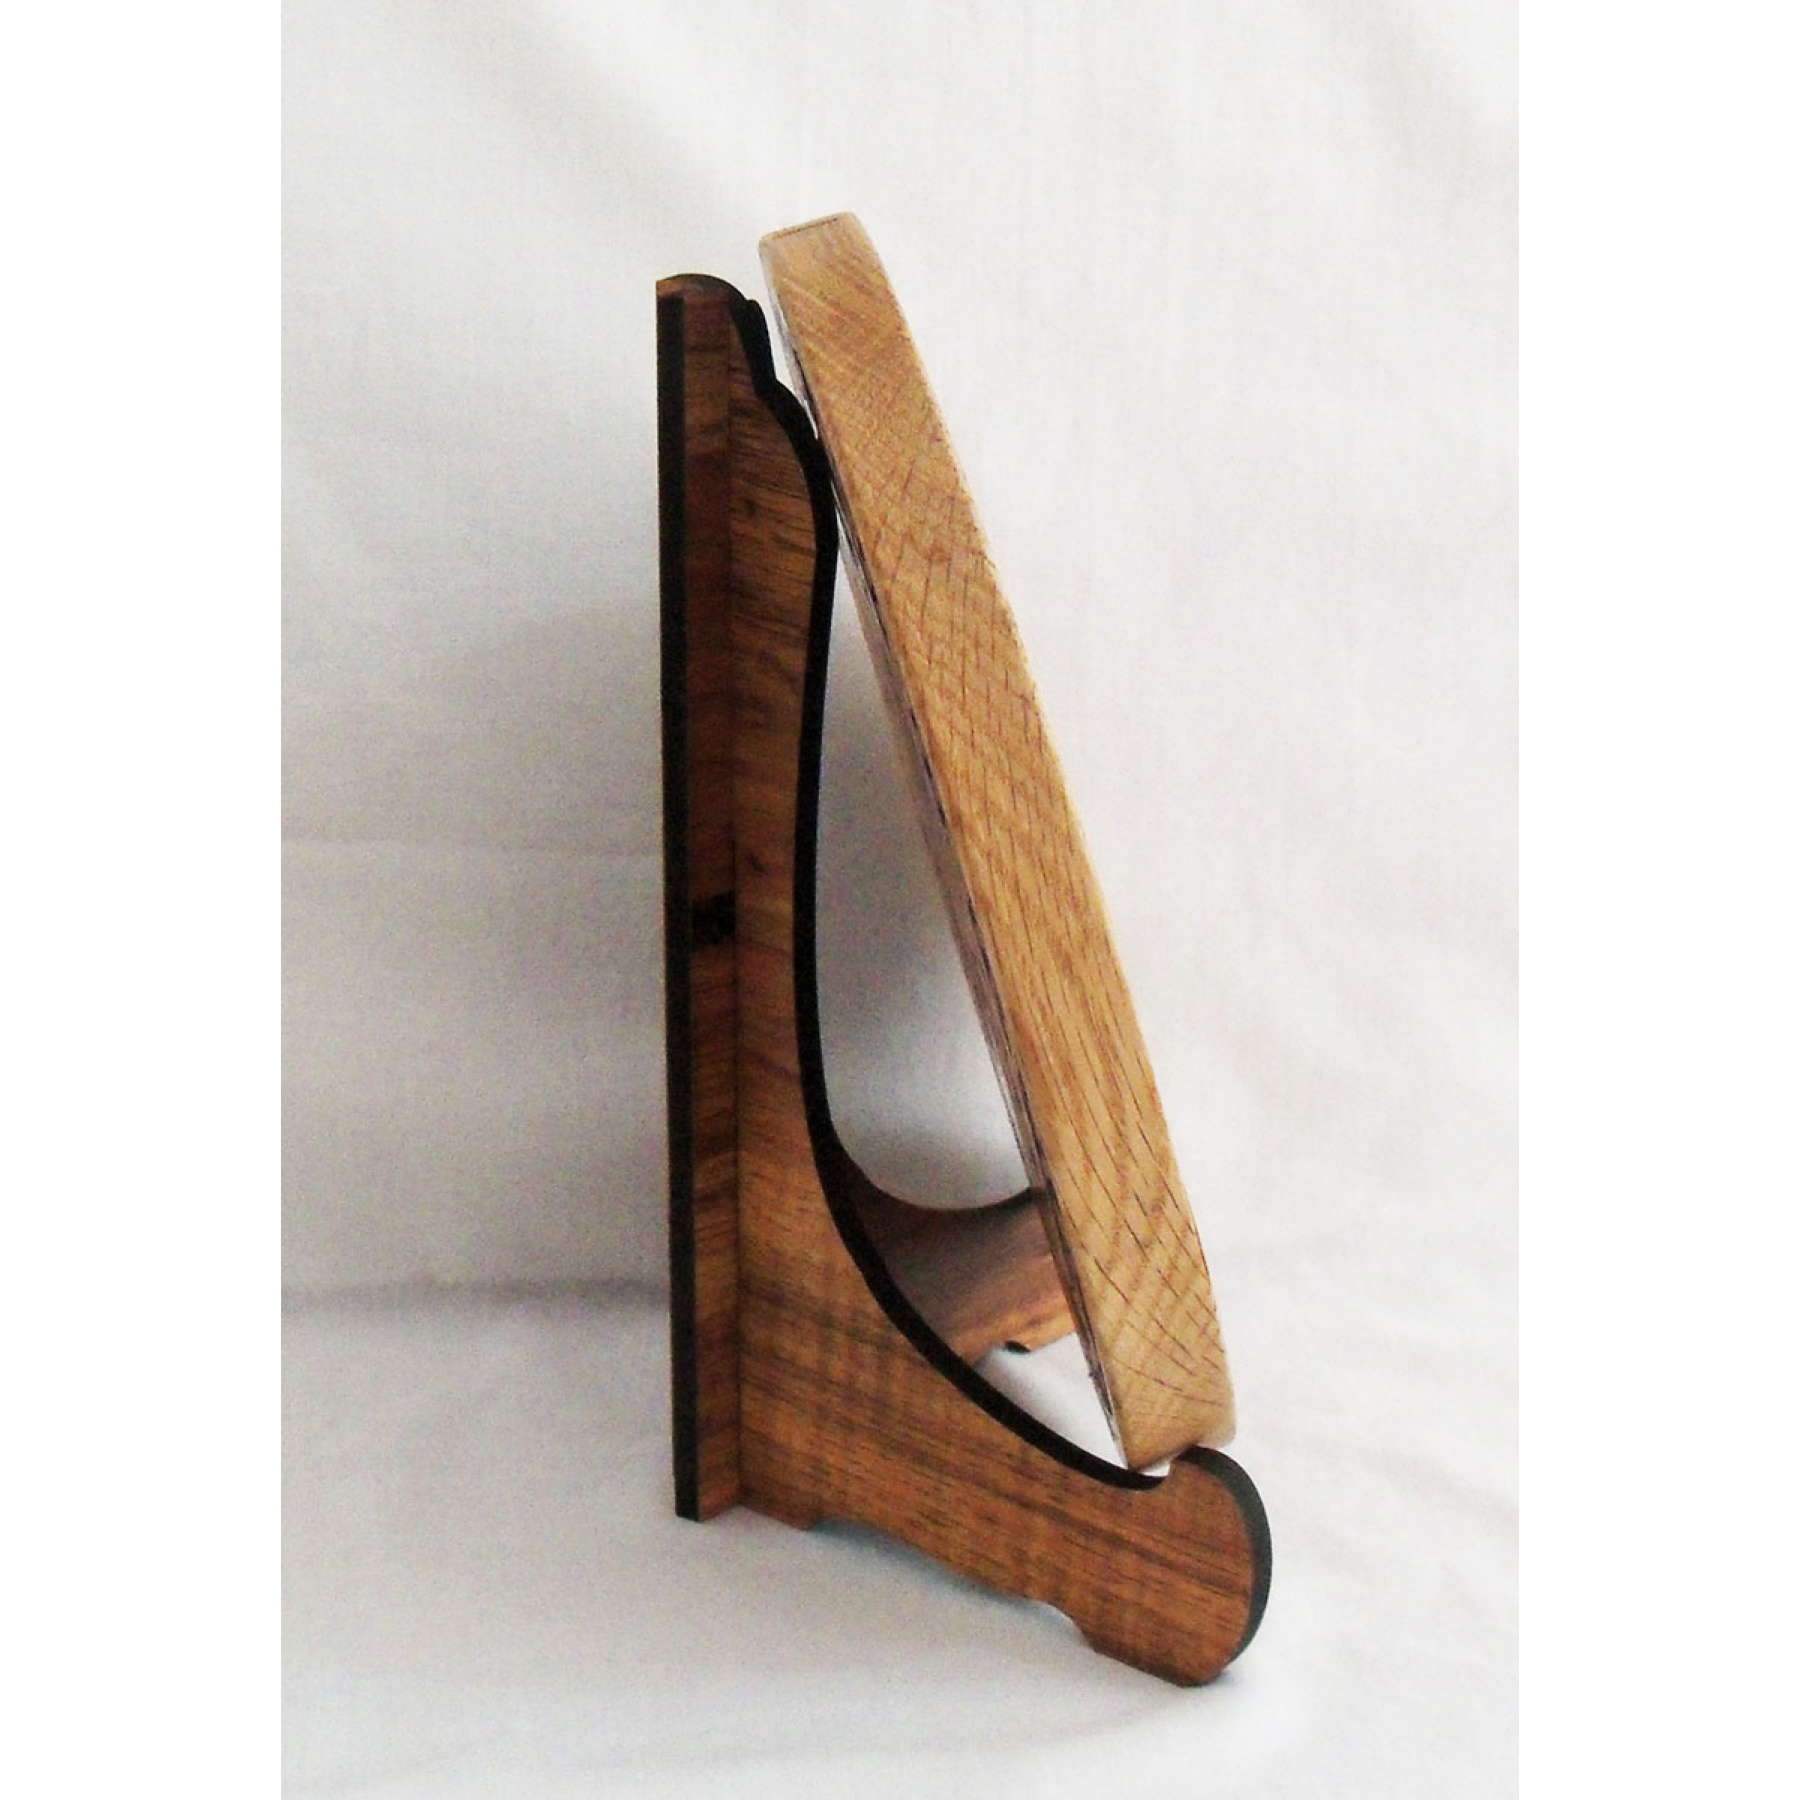 Wooden Stand for plaques